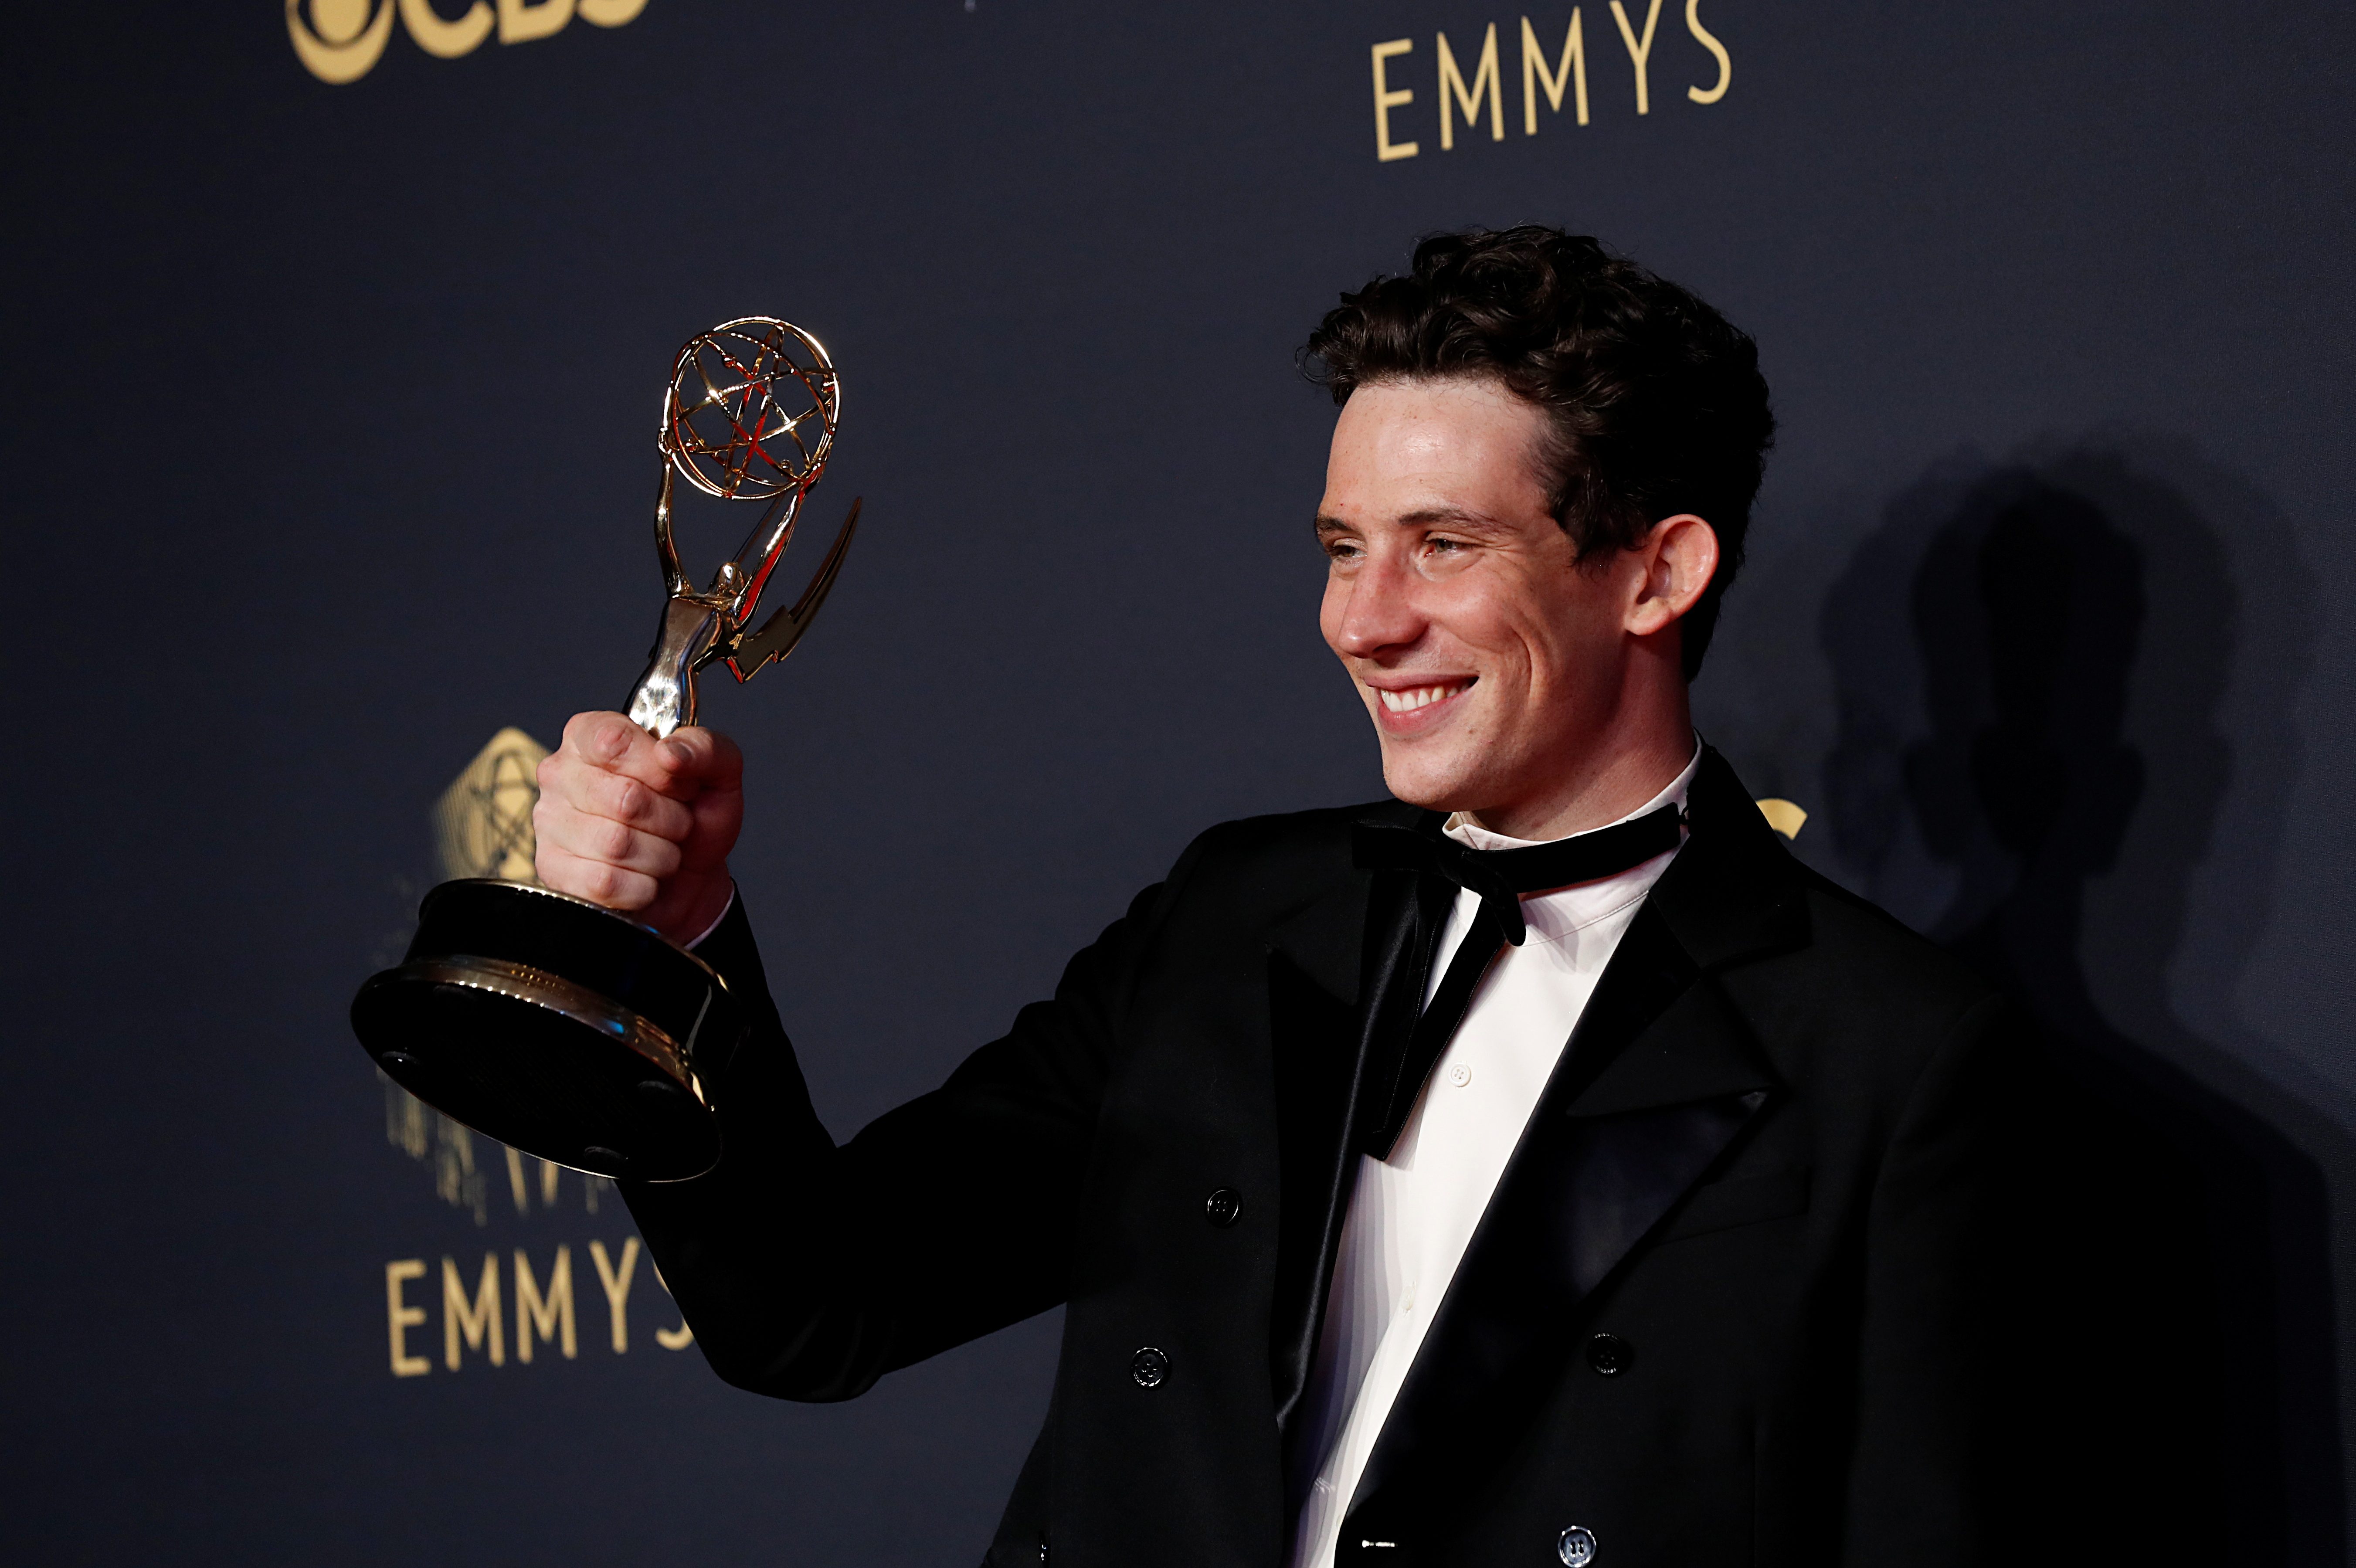 WATCH: ‘The Crown’ stars dedicate Emmys win to family, co-stars